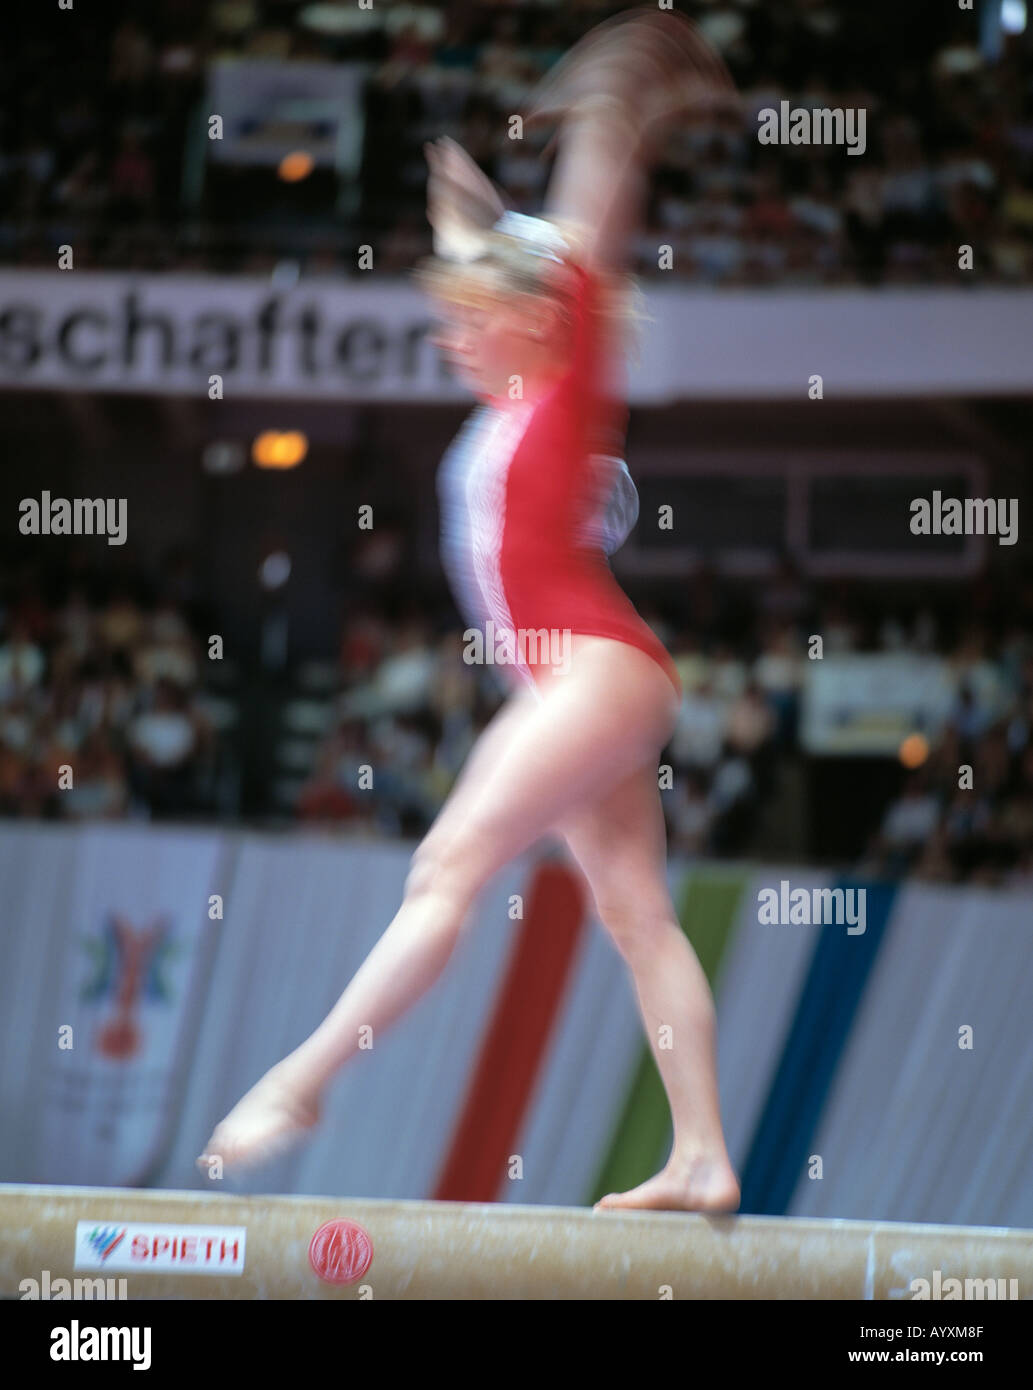 sports, gymnastics, gymnastic exercise, women, young girl on the balance beam, woman, blurred, fuzzy, unsharp, Stock Photo